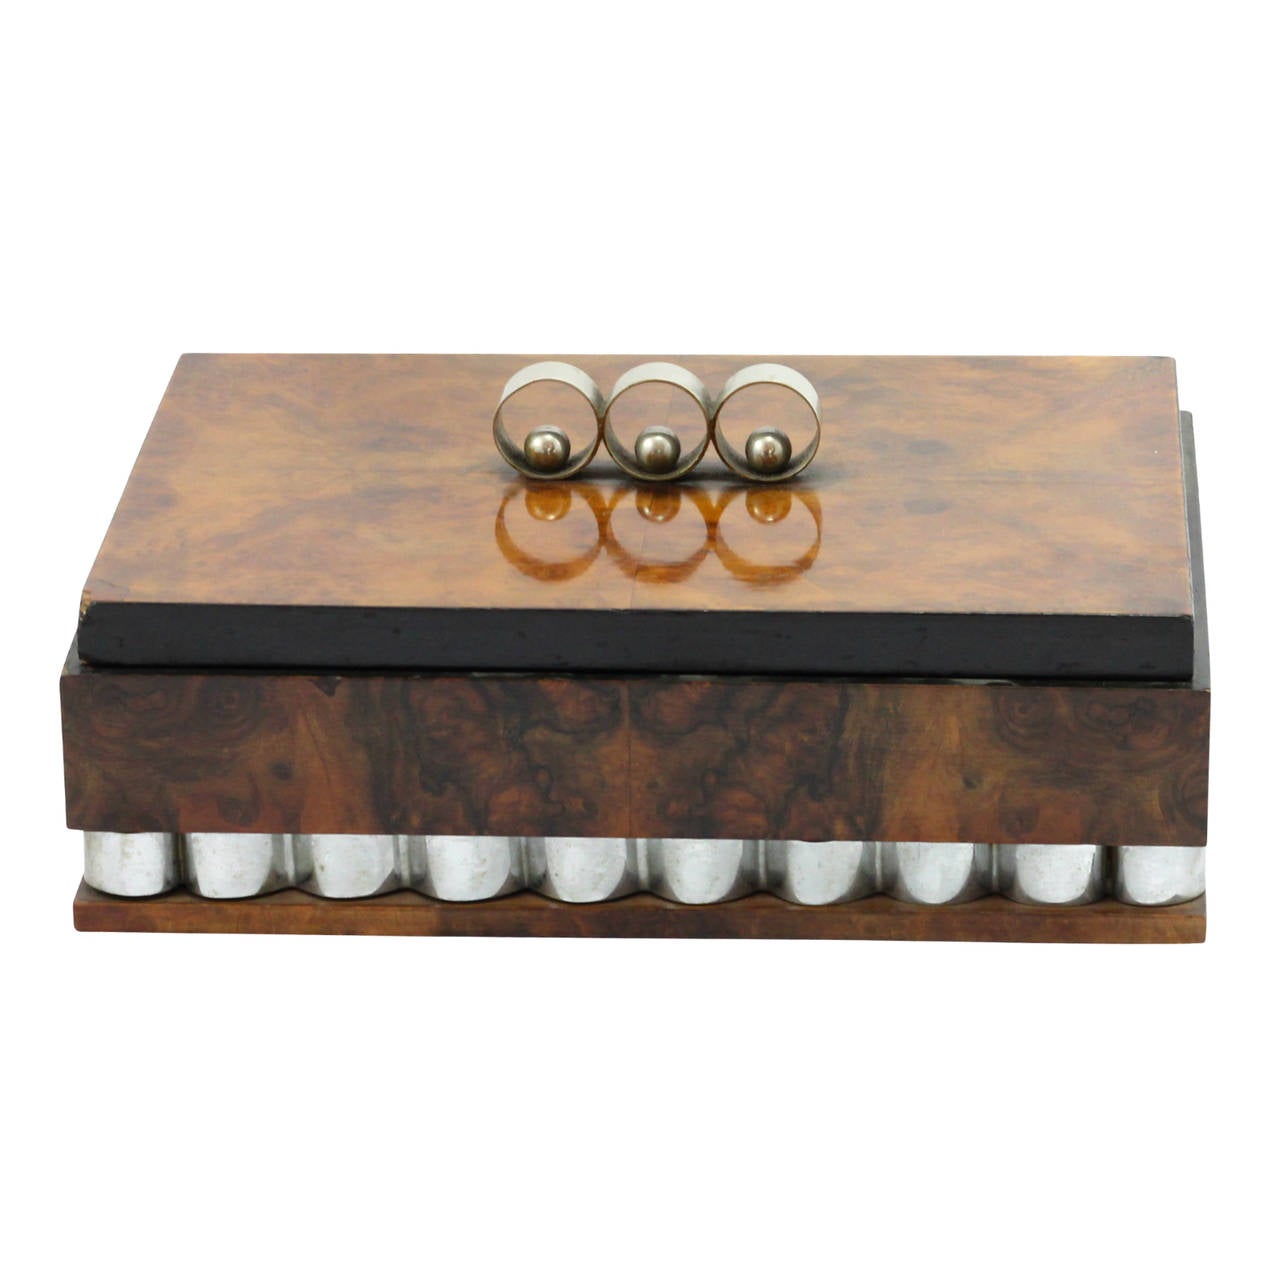 An Art Deco walnut veneered jewelry box. This piece has a mirrored lid and a timber lining.